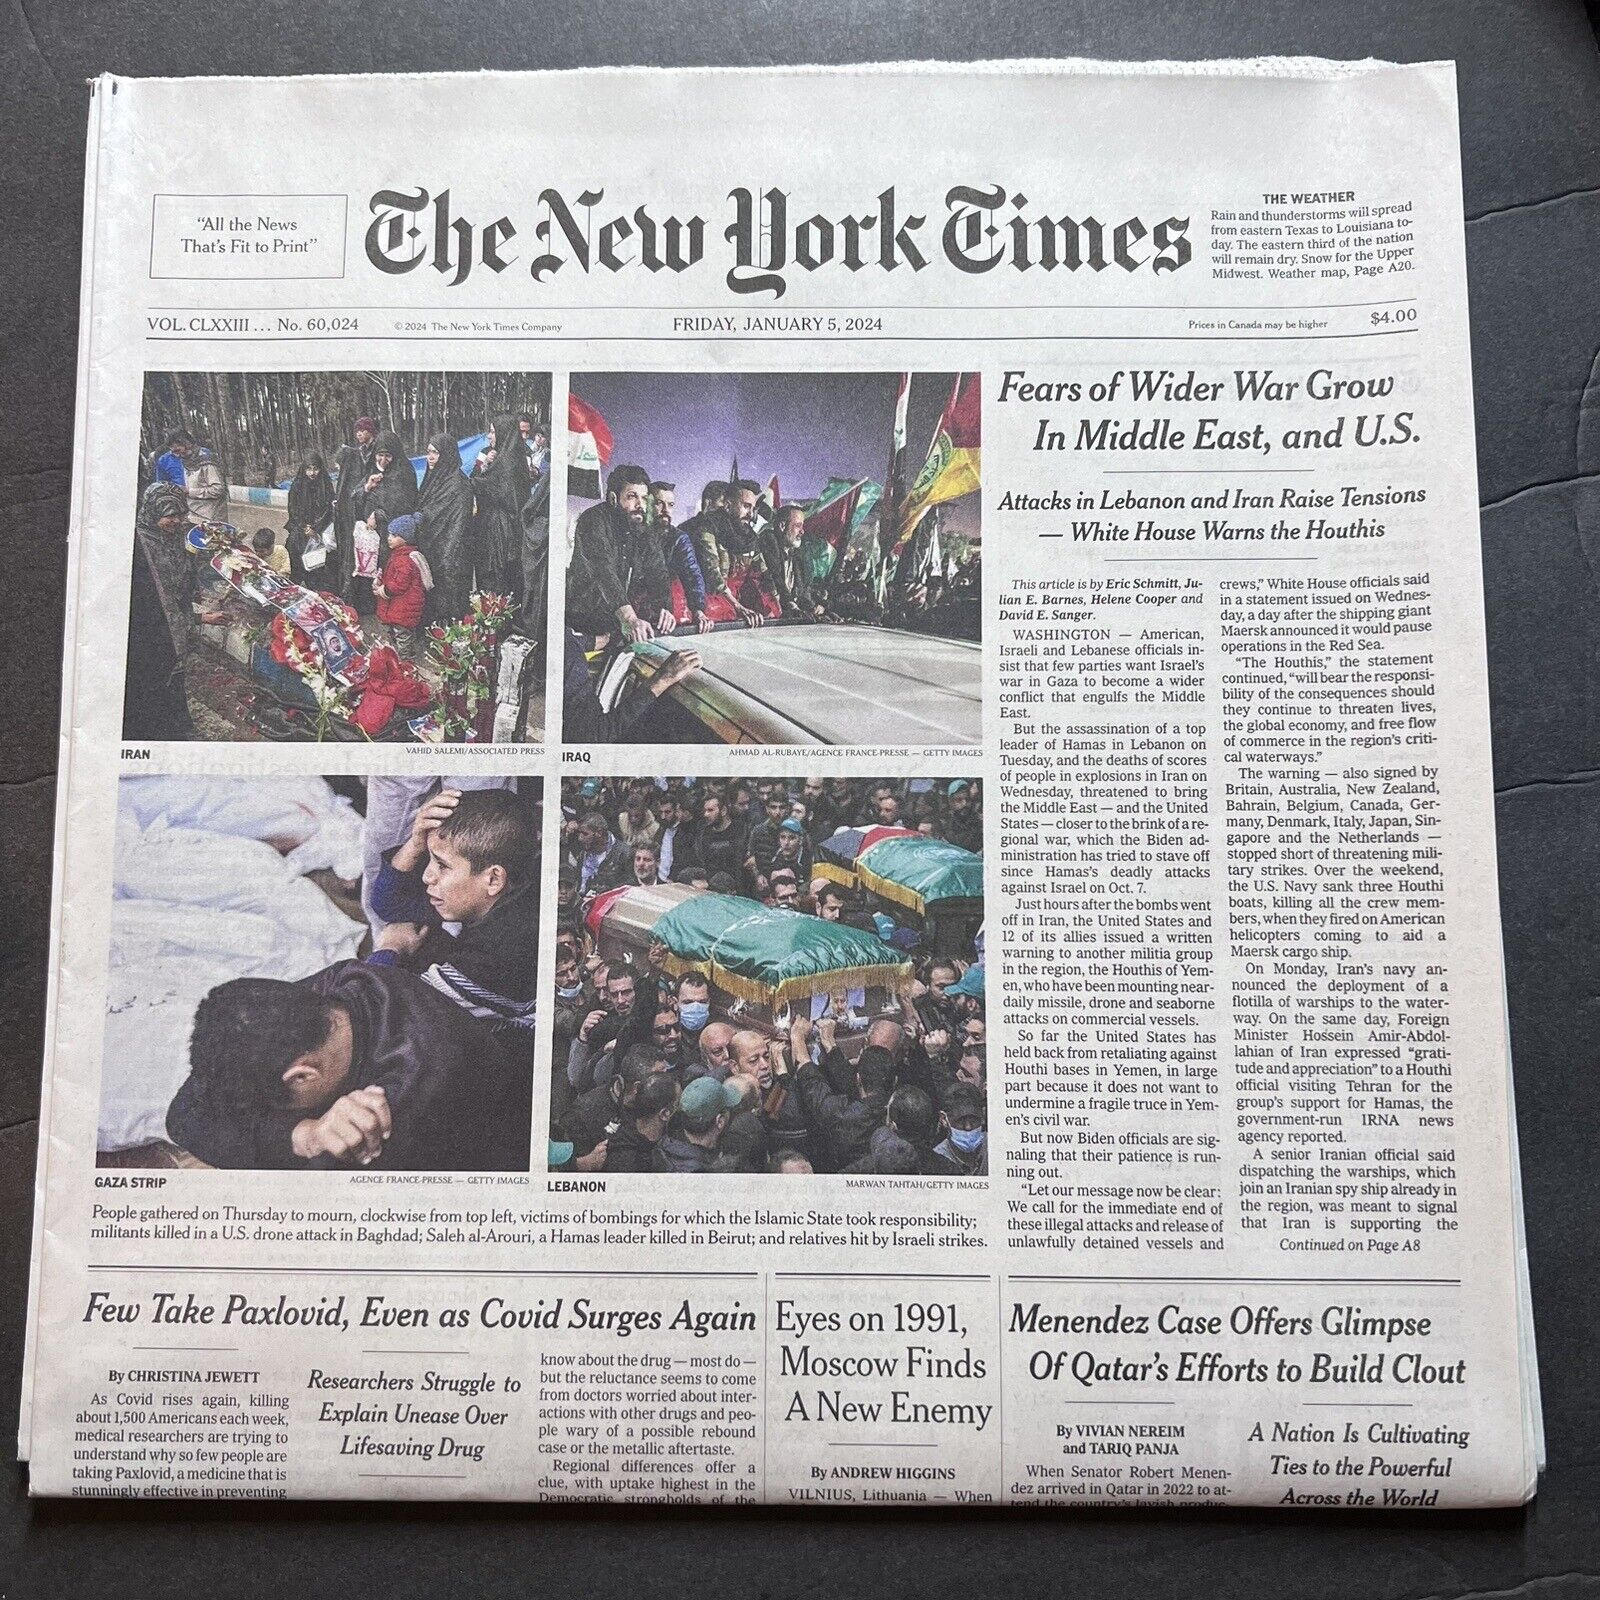 The New York Times Newspaper January 5 2024 Fears Of Wider War Grow Middle E/US